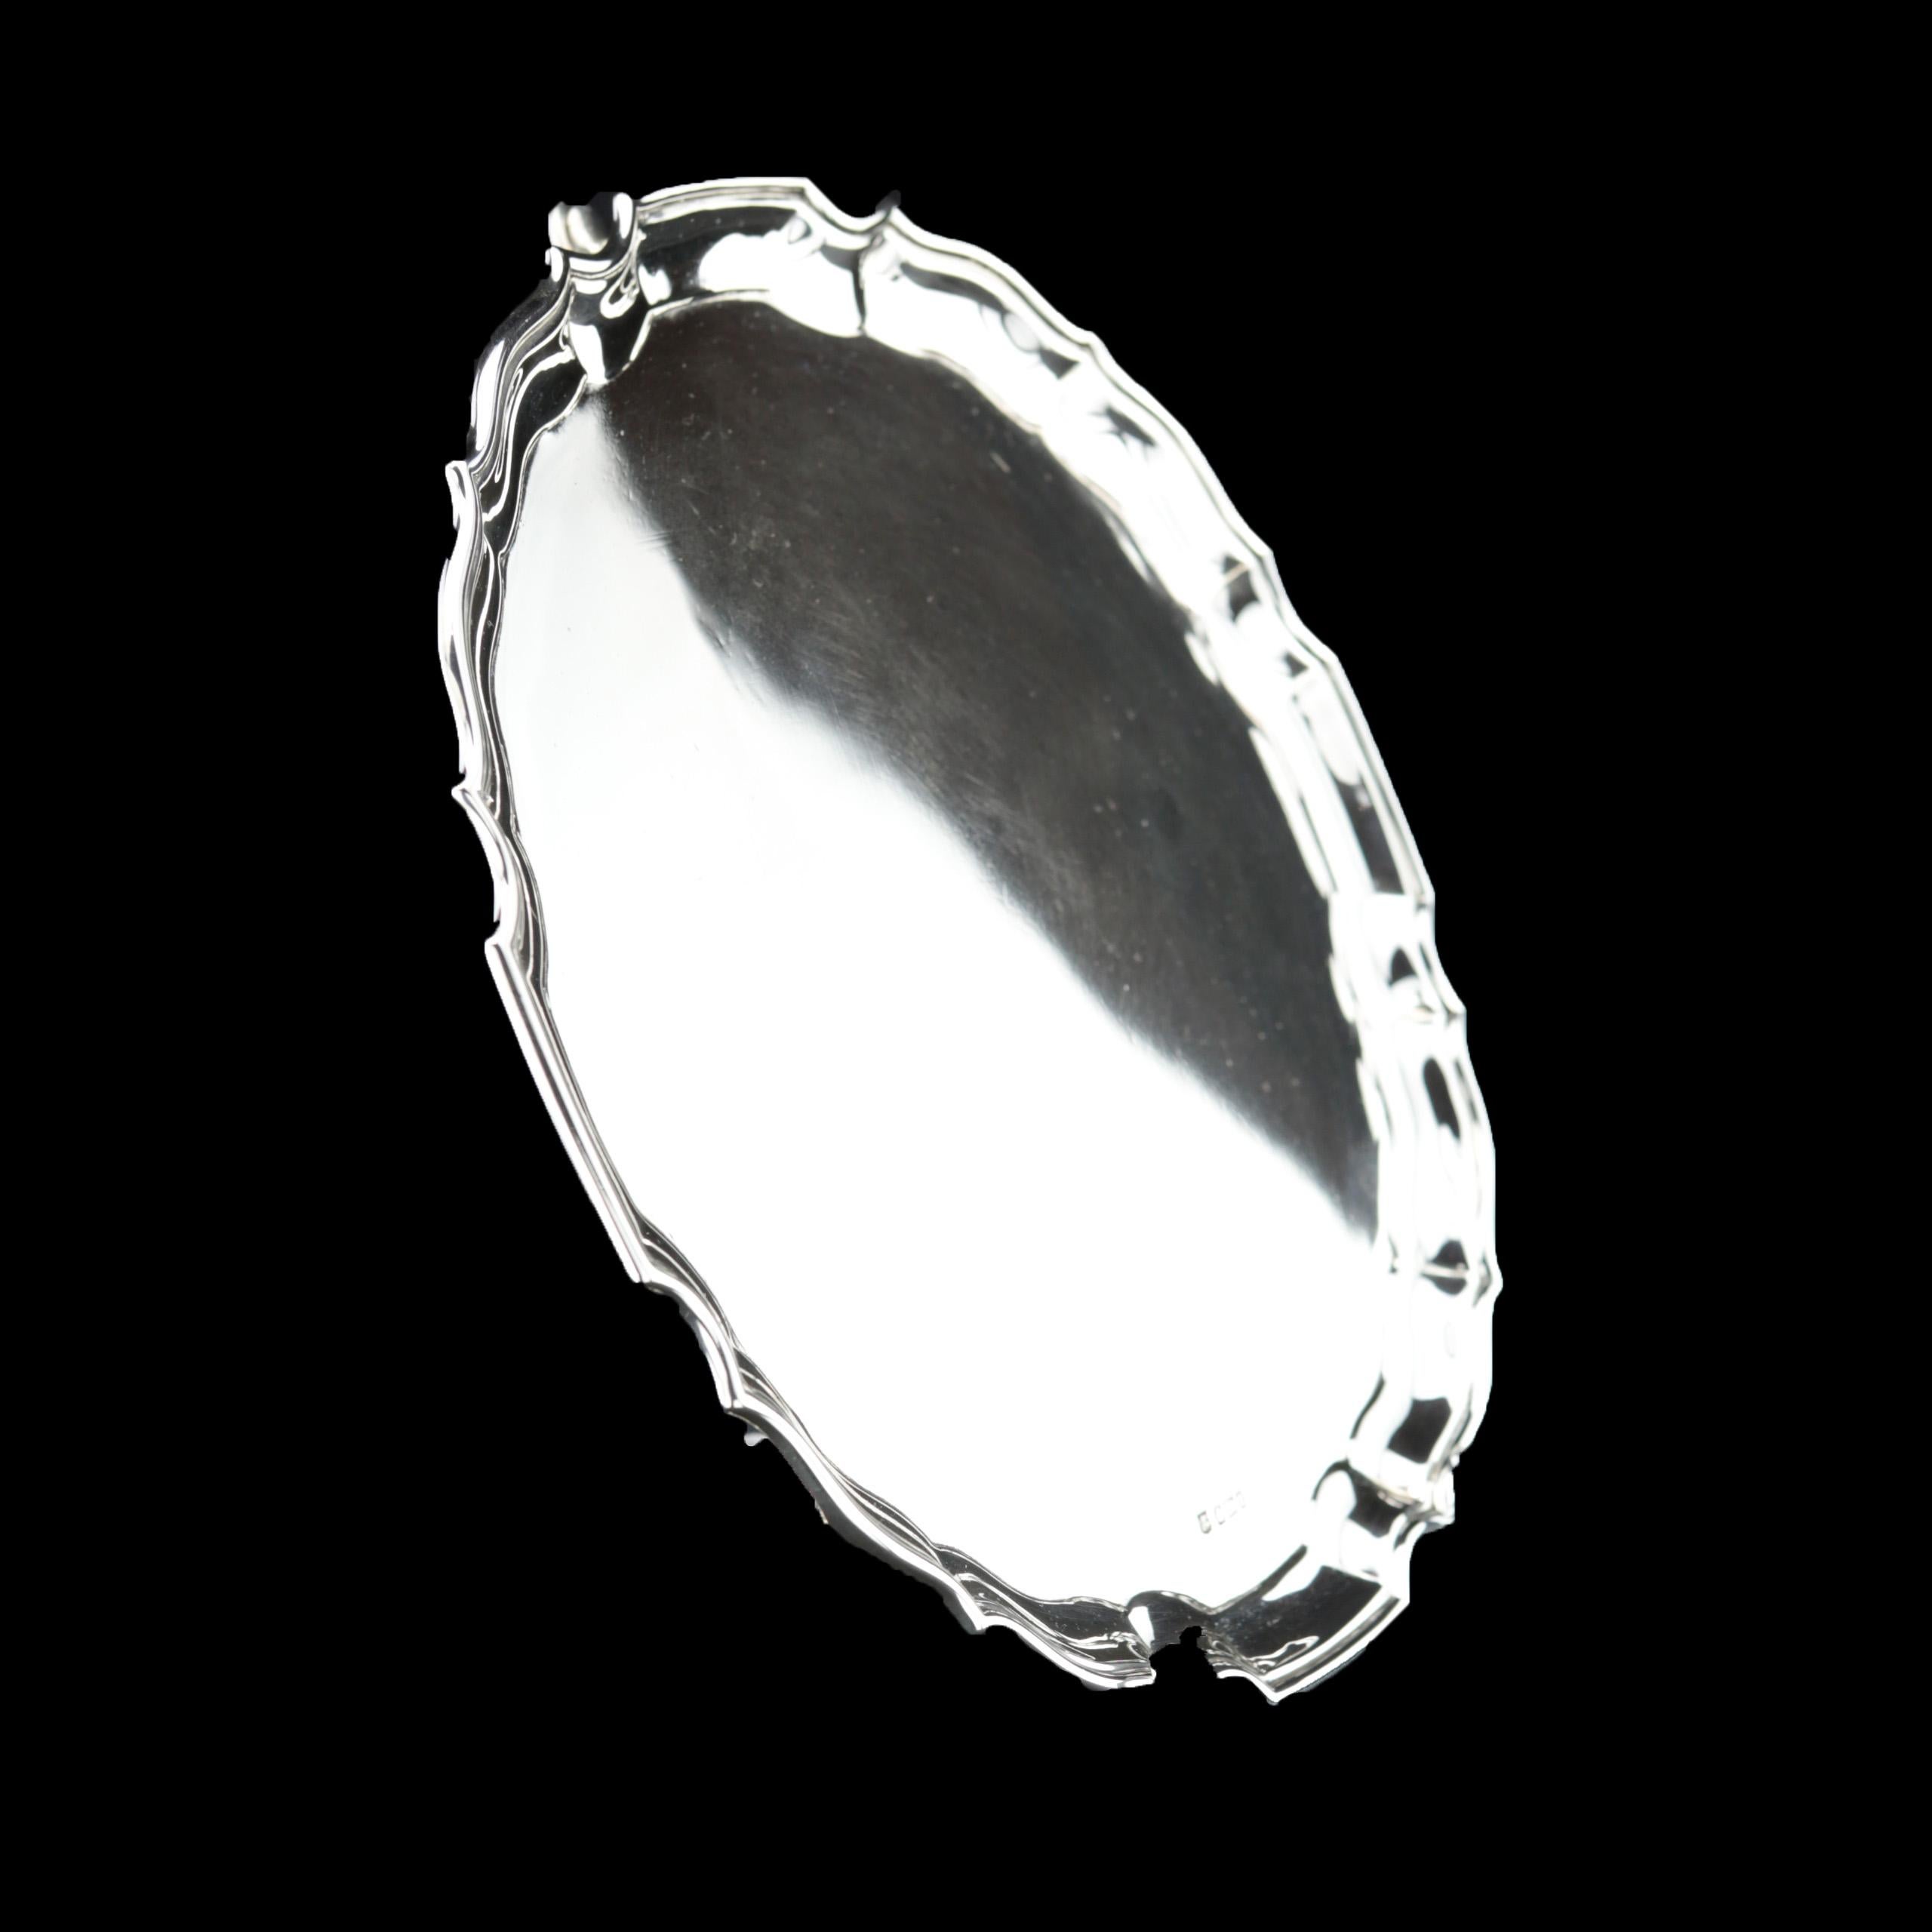 Silver tray, salver
Great Britain, Sheffield 1911
925/- sterling silver
Hallmarked
Measures: diameter 28 cm


You will be 100% satisfied with your authentic piece of art!





 